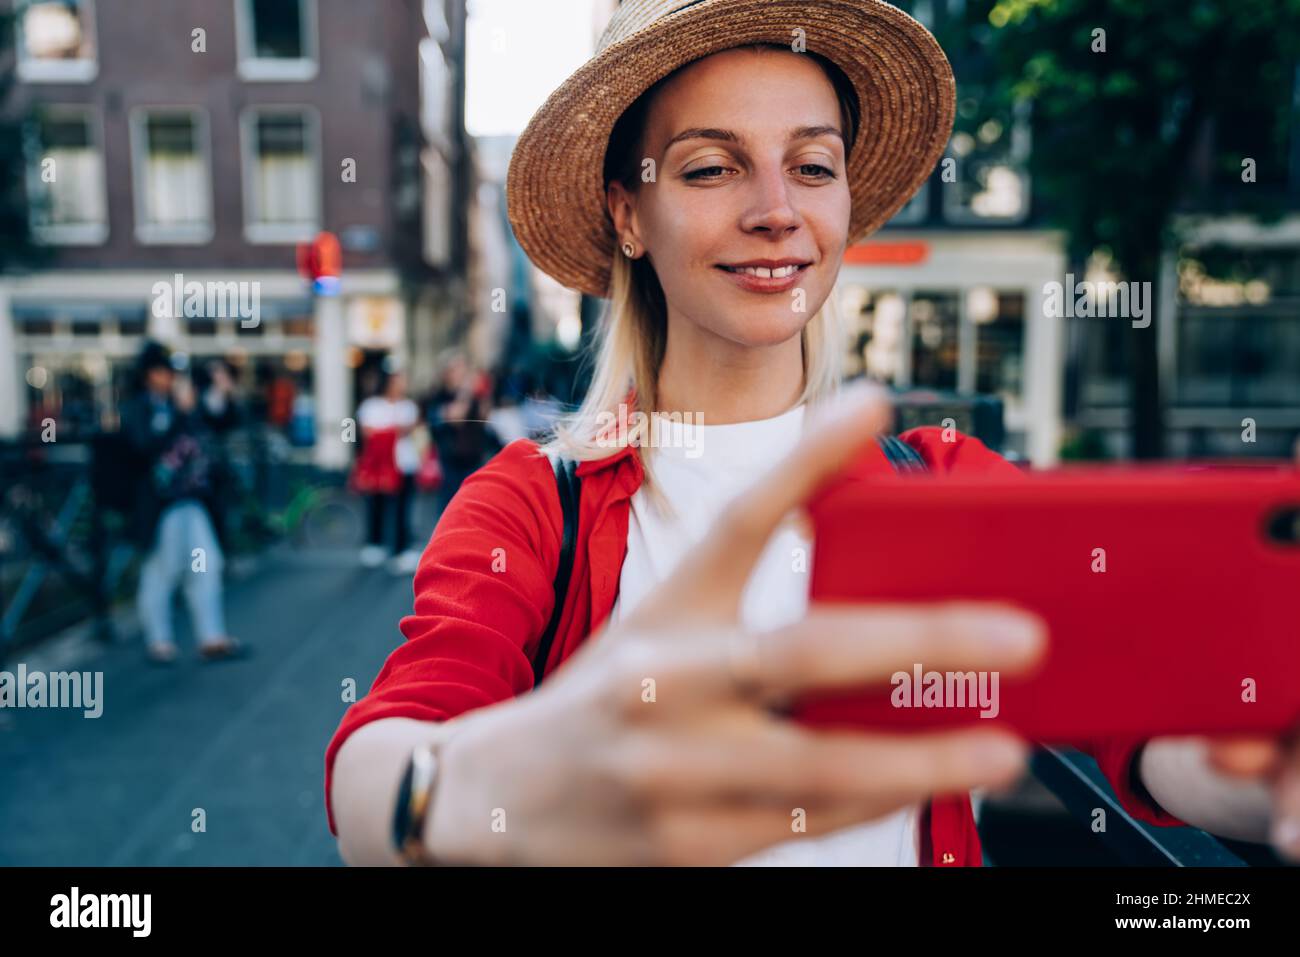 Smiling woman taking selfie on smartphone on city street Stock Photo